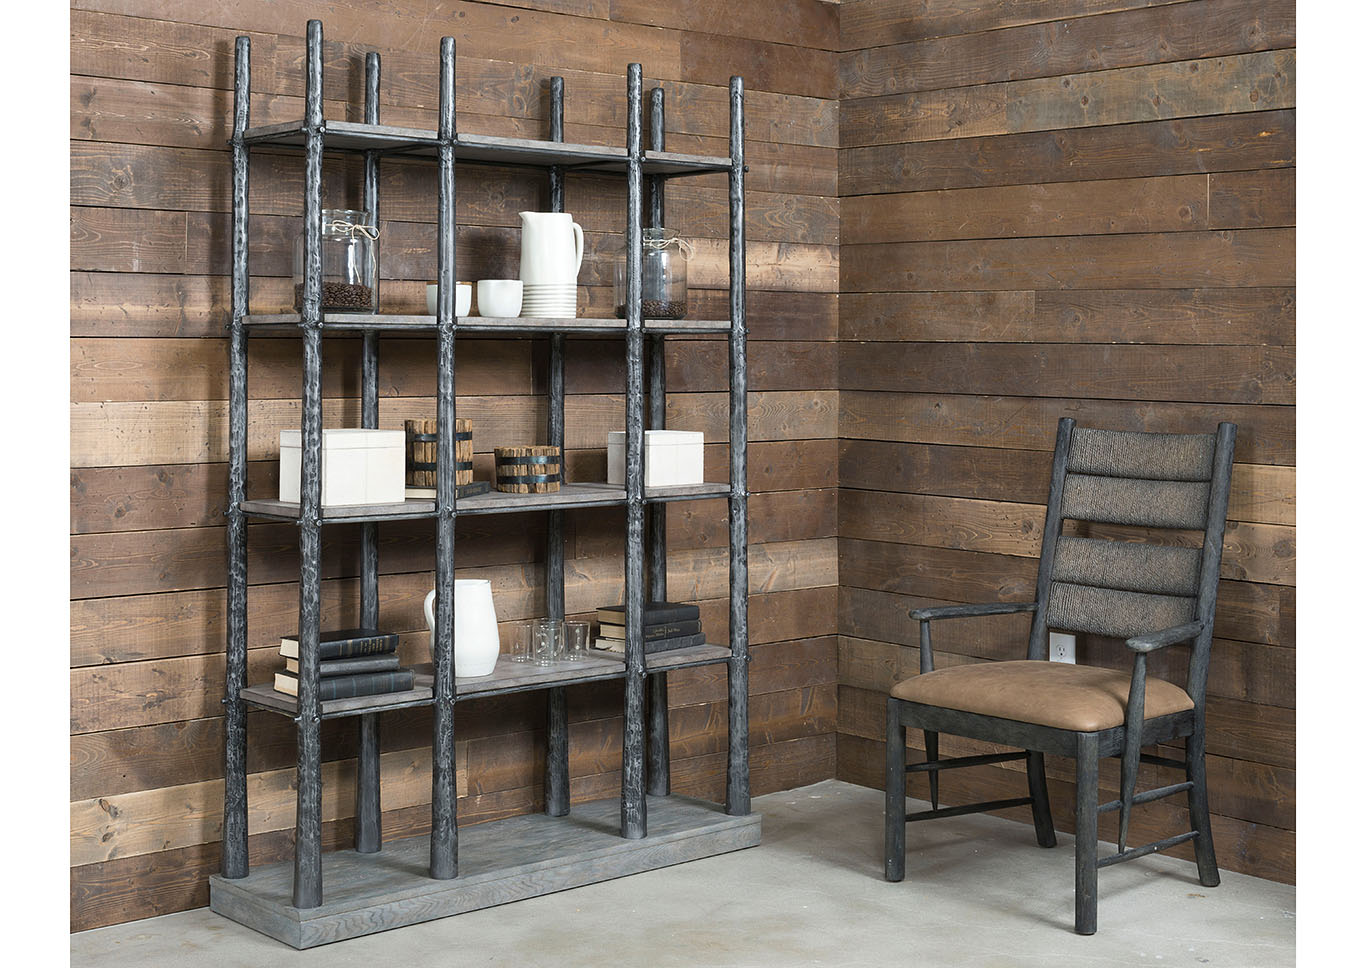 Glades Riverbed Bookcase,Kincaid